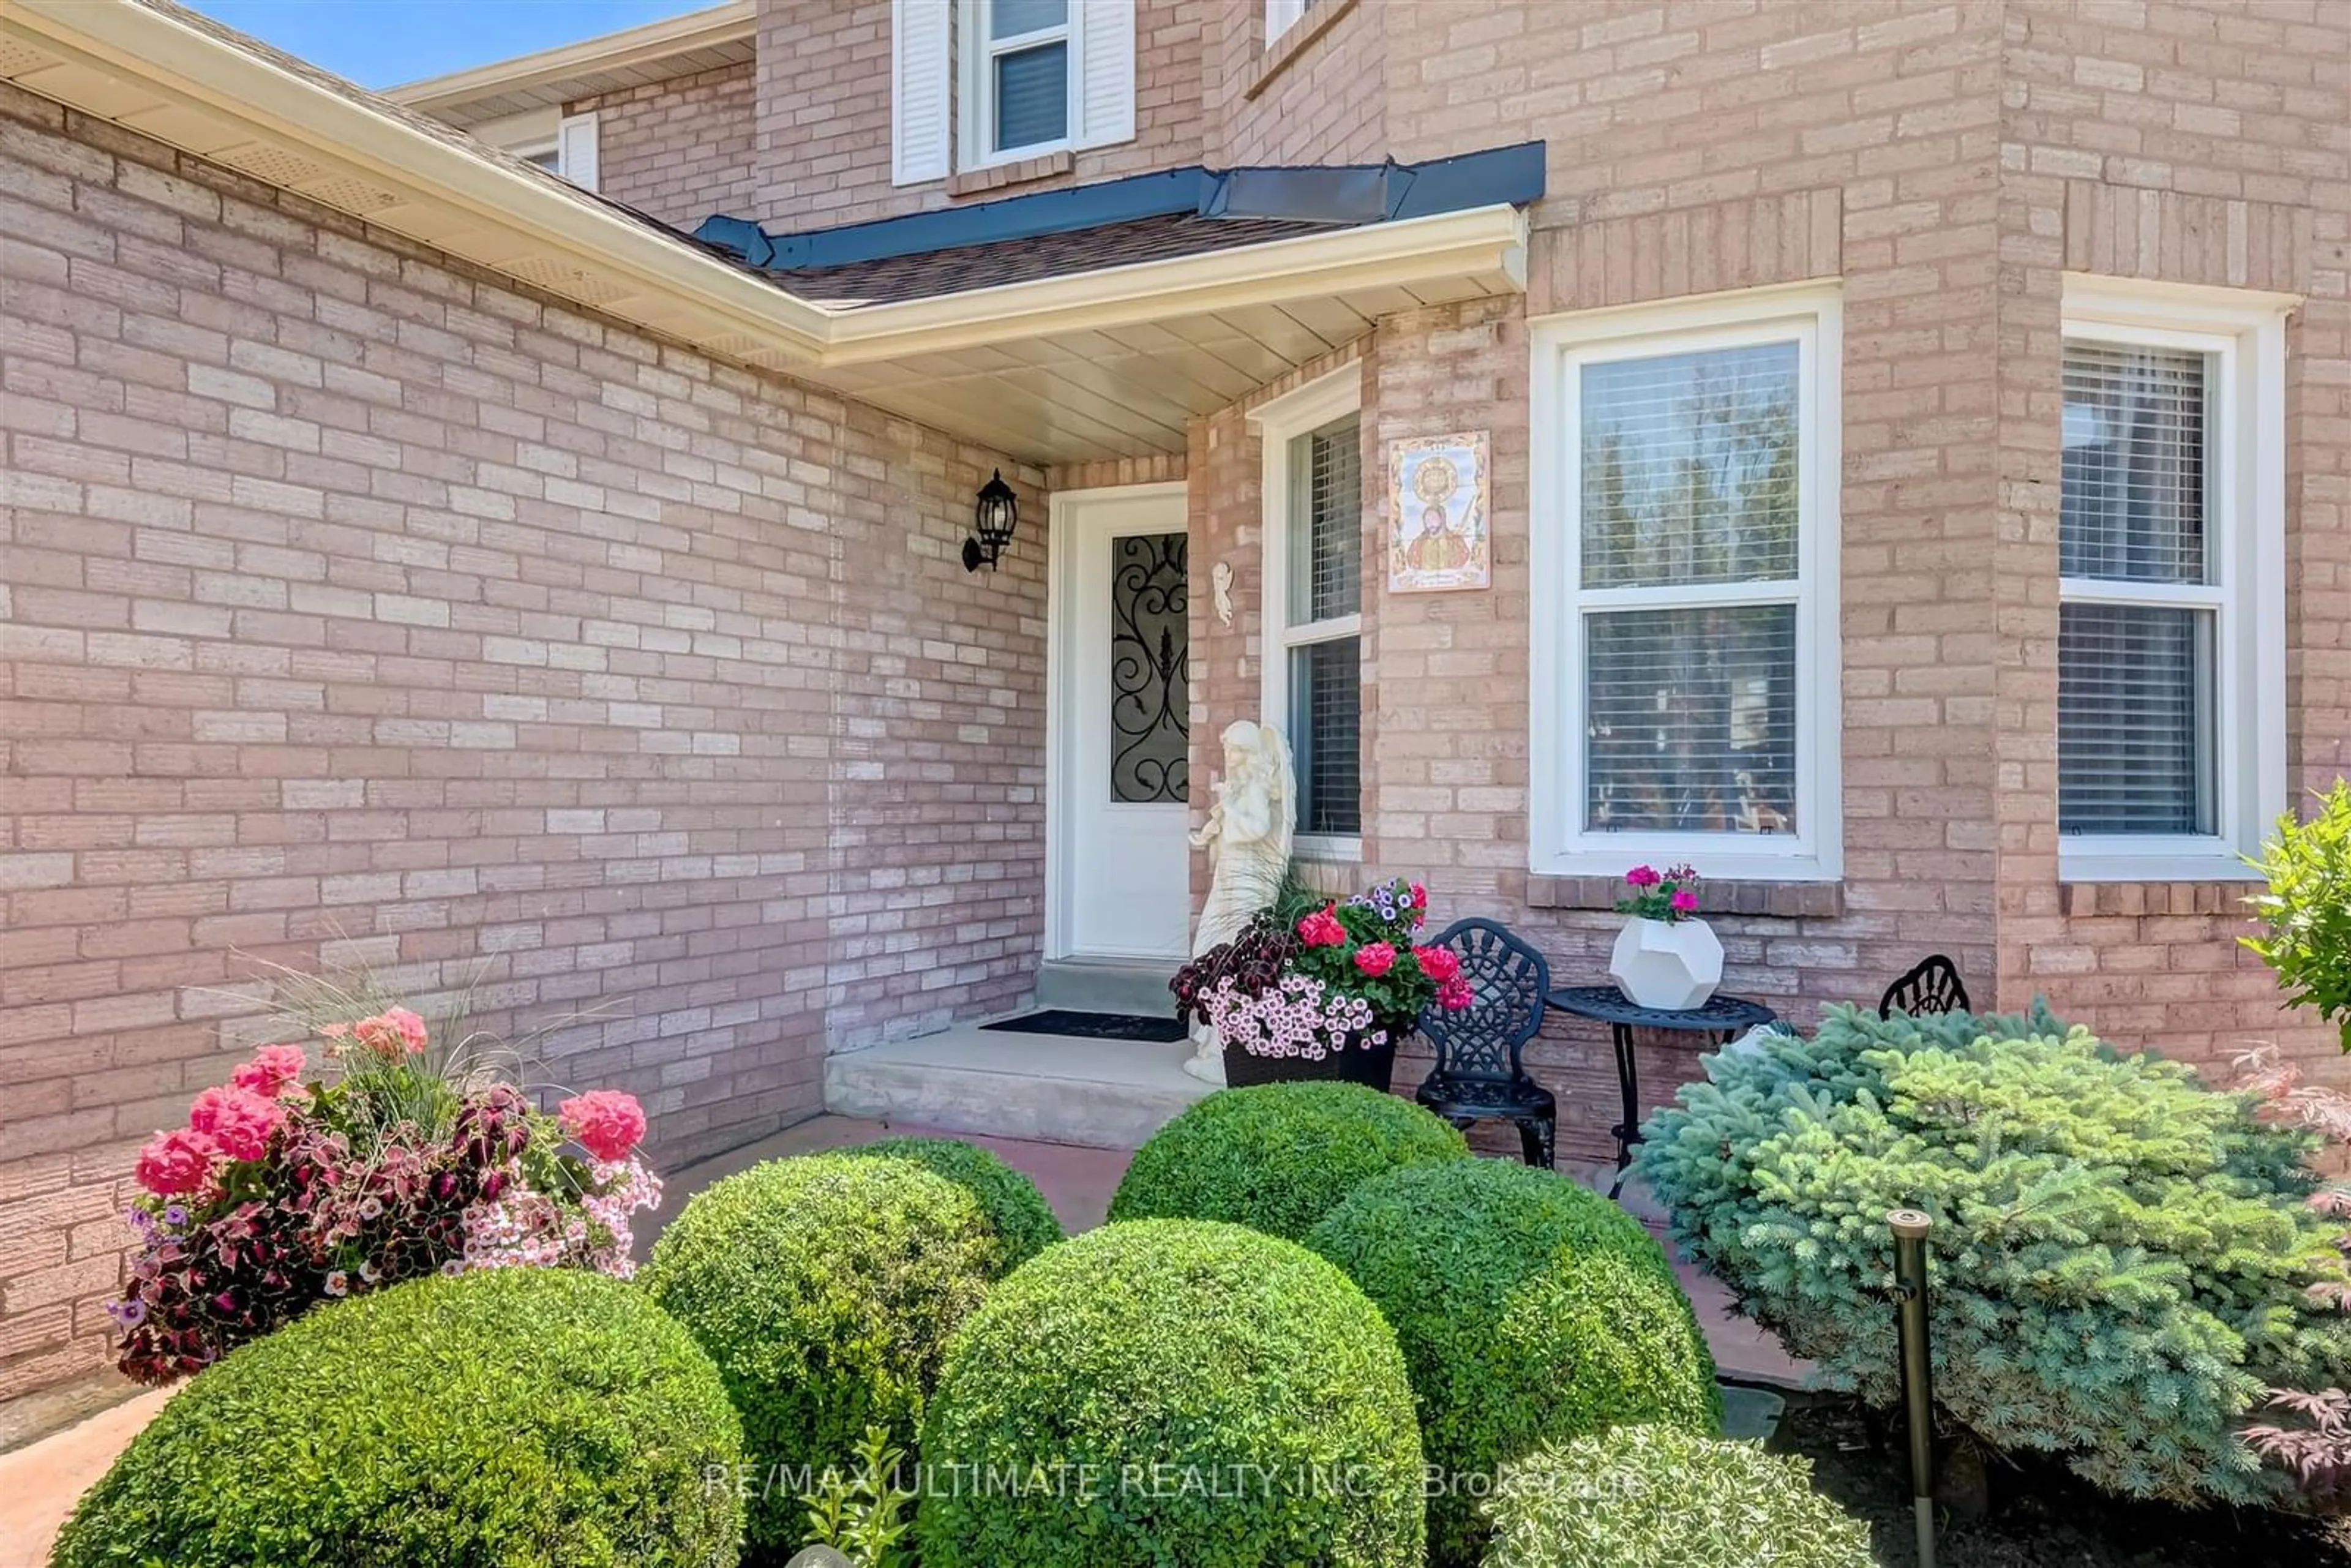 Home with brick exterior material for 4414 Mayflower Dr, Mississauga Ontario L5R 1S8